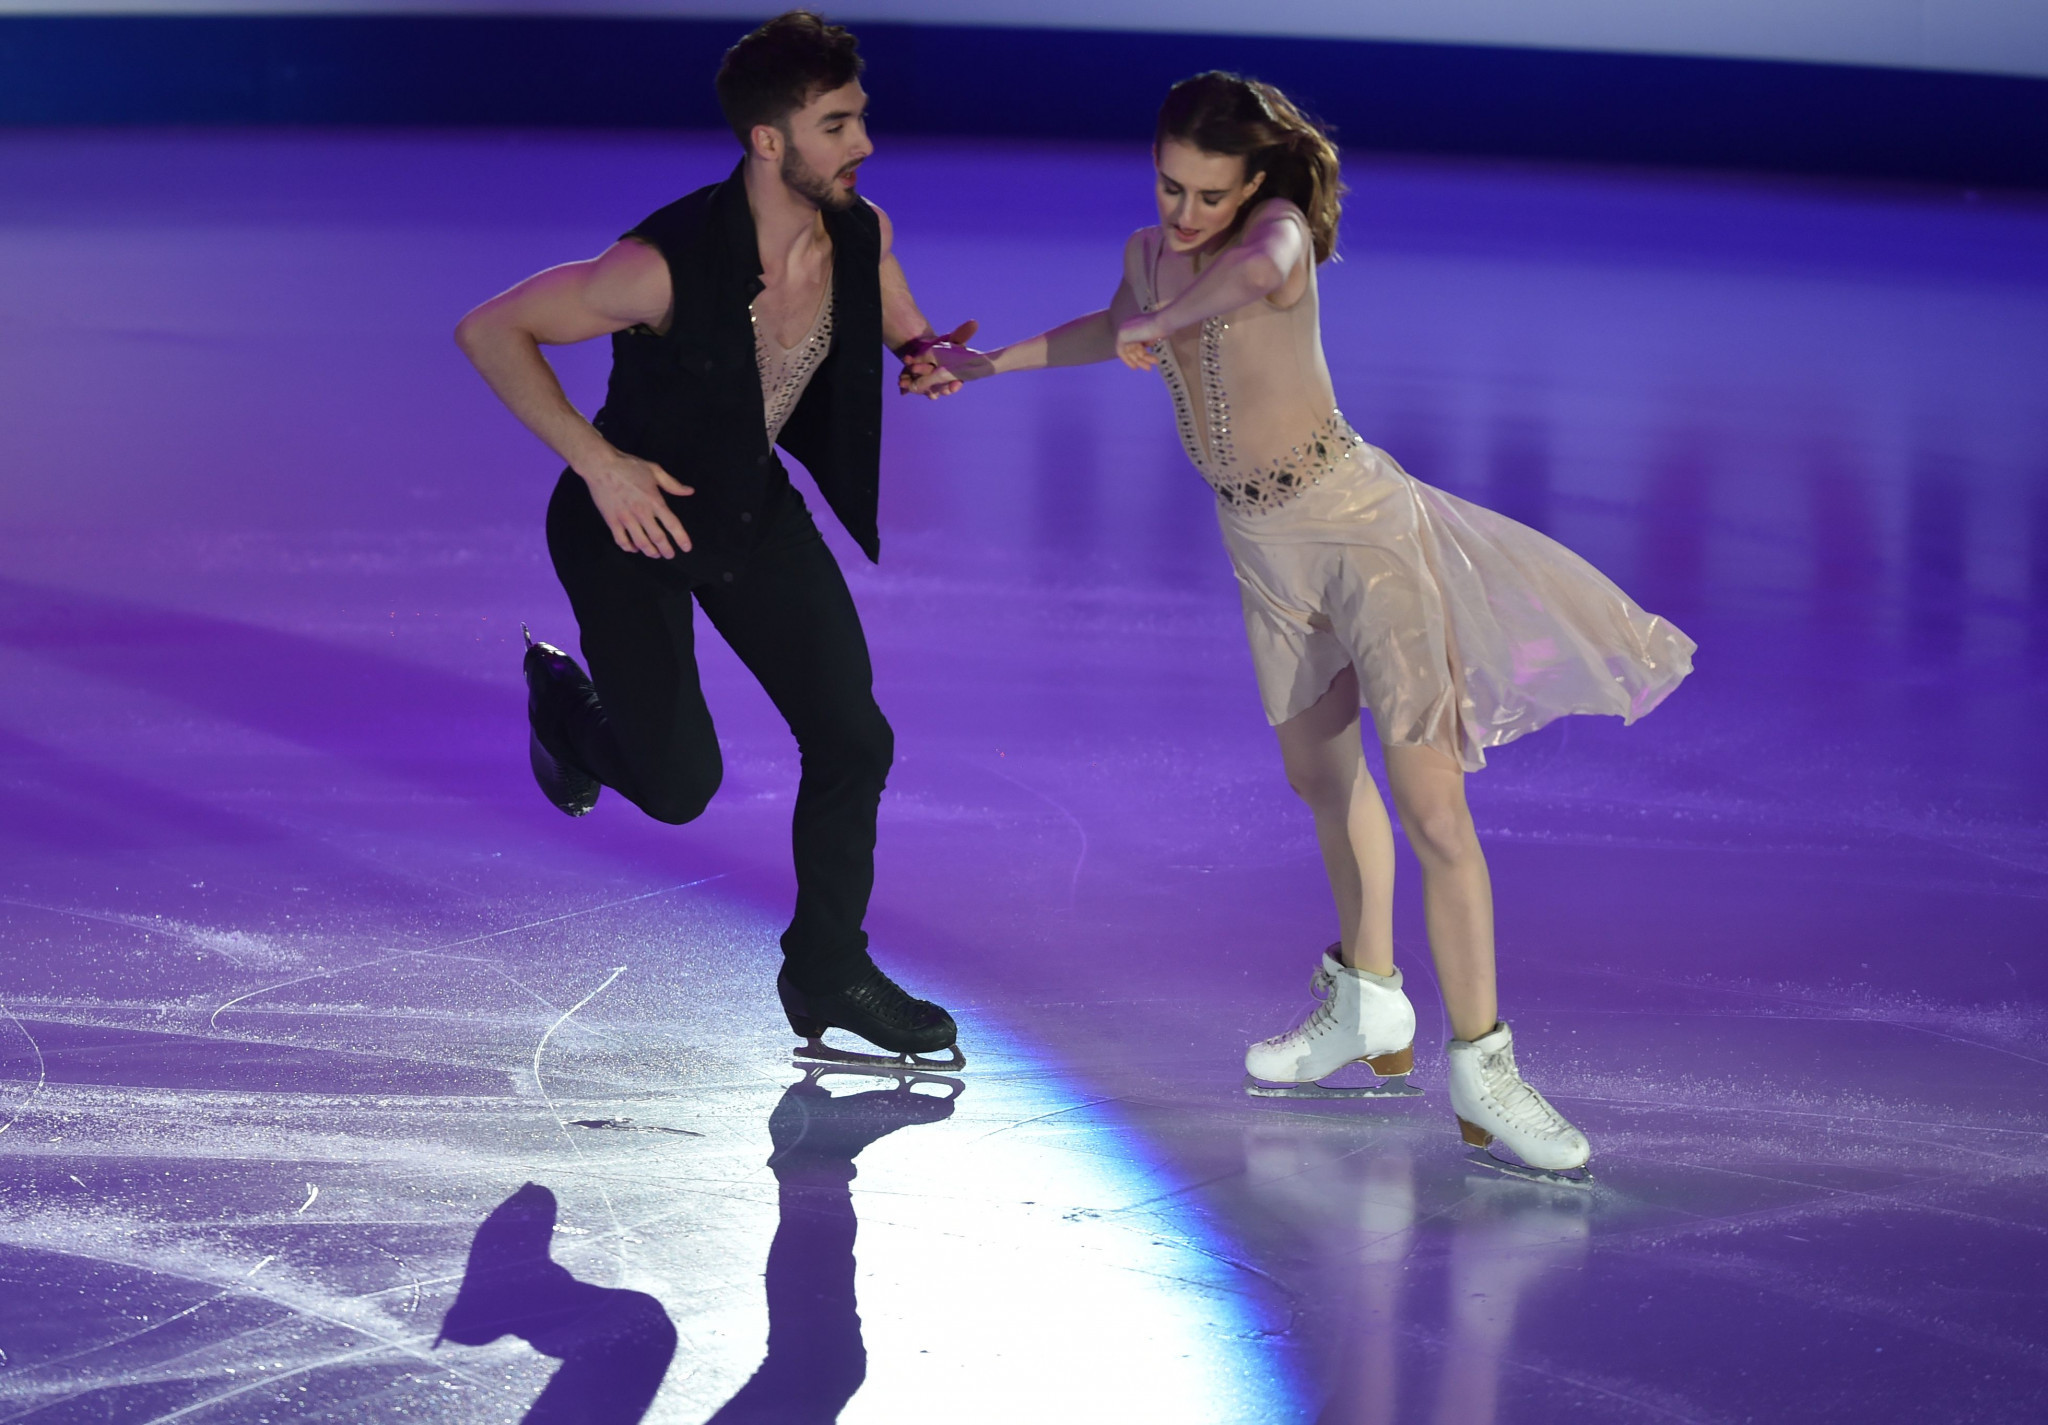 French figure skaters such as Gabriella Papadakis and Guillaume Cizeron would have competed in Grenoble ©Getty Images